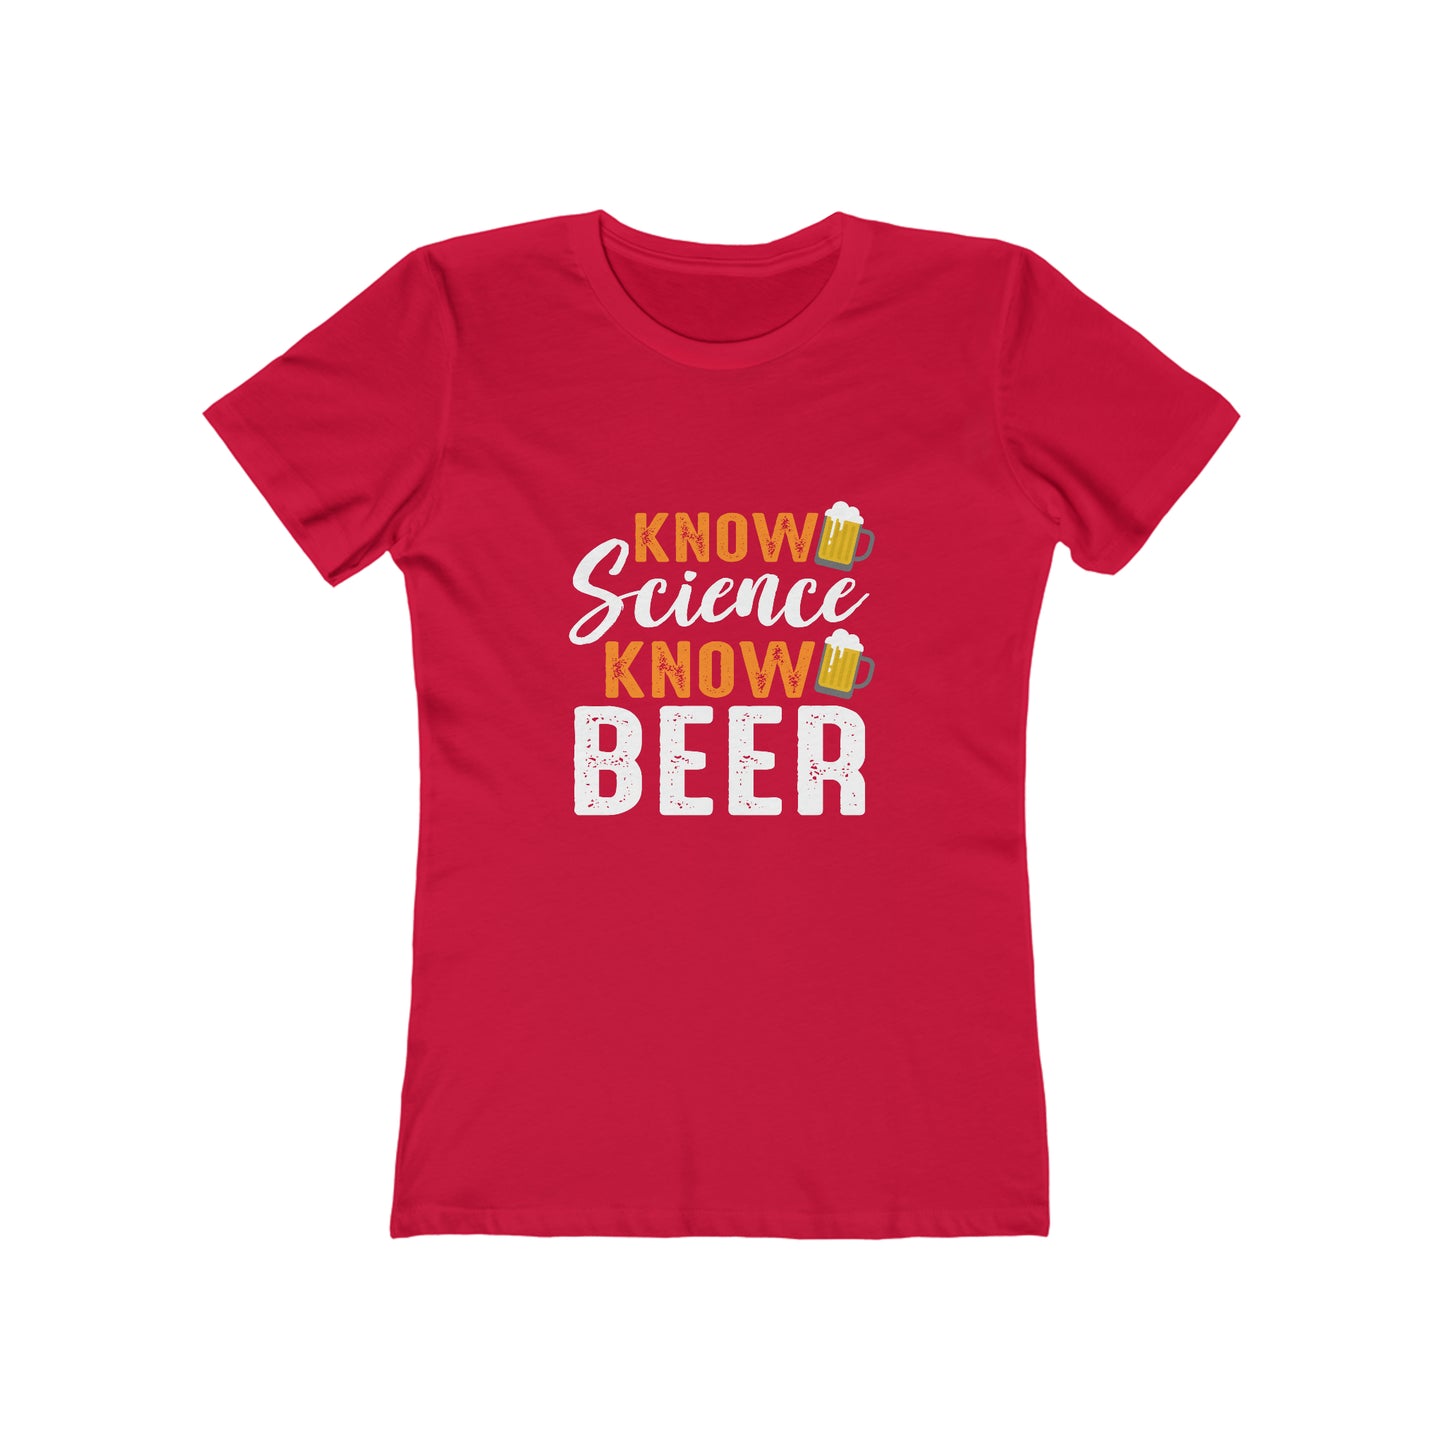 Know Science Know Beer - Women's T-shirt